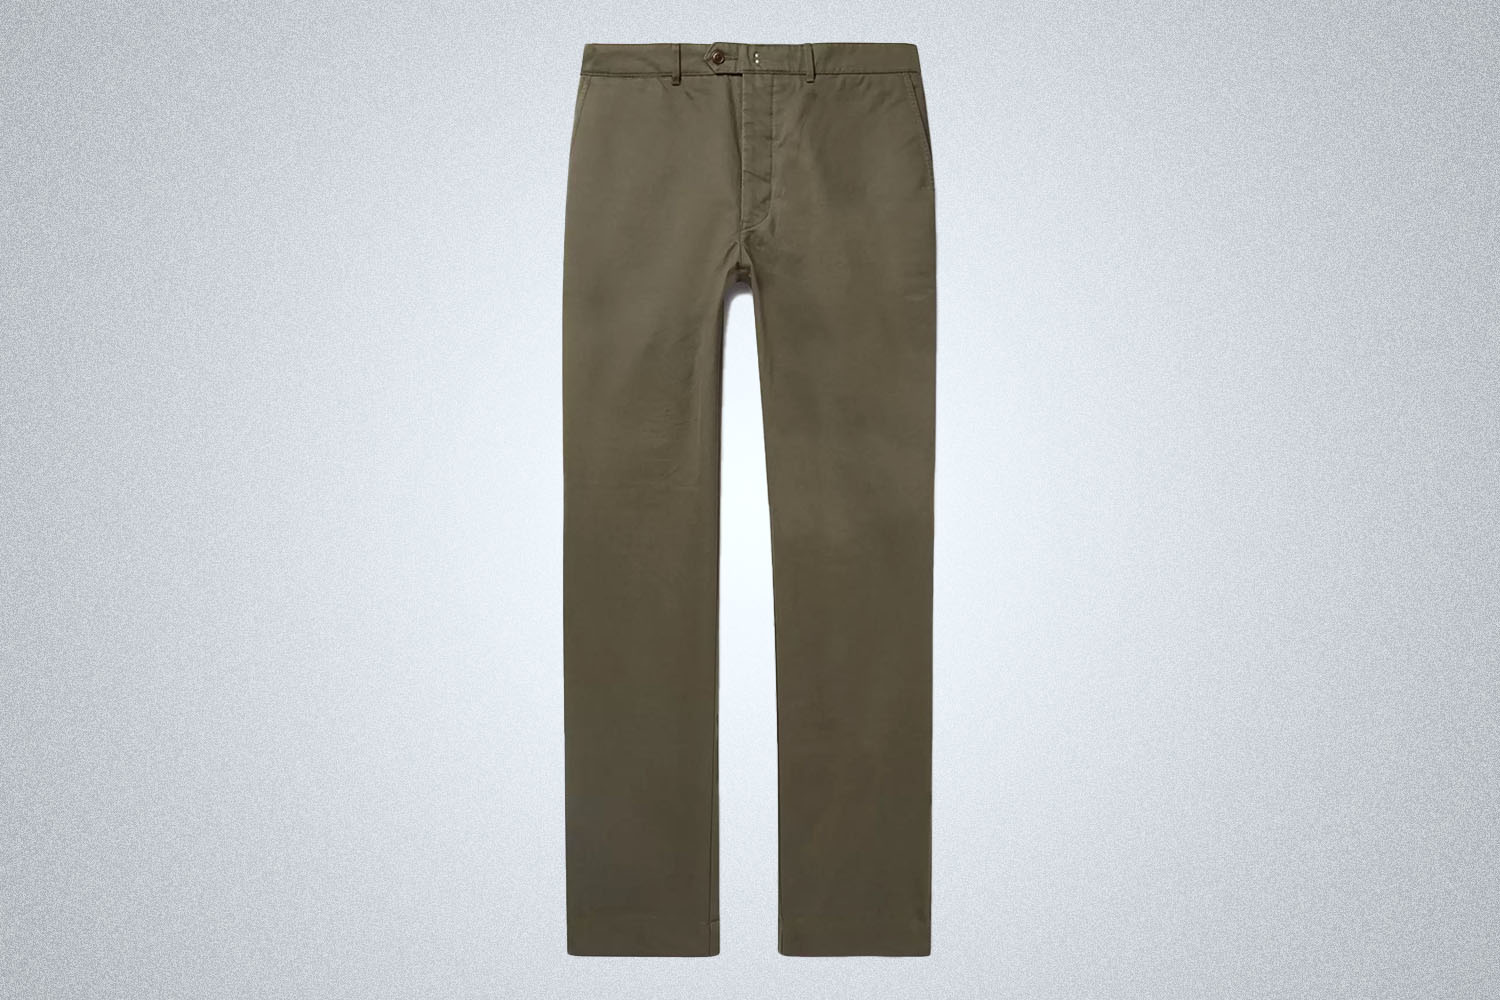 a pair of chinos on a grey background